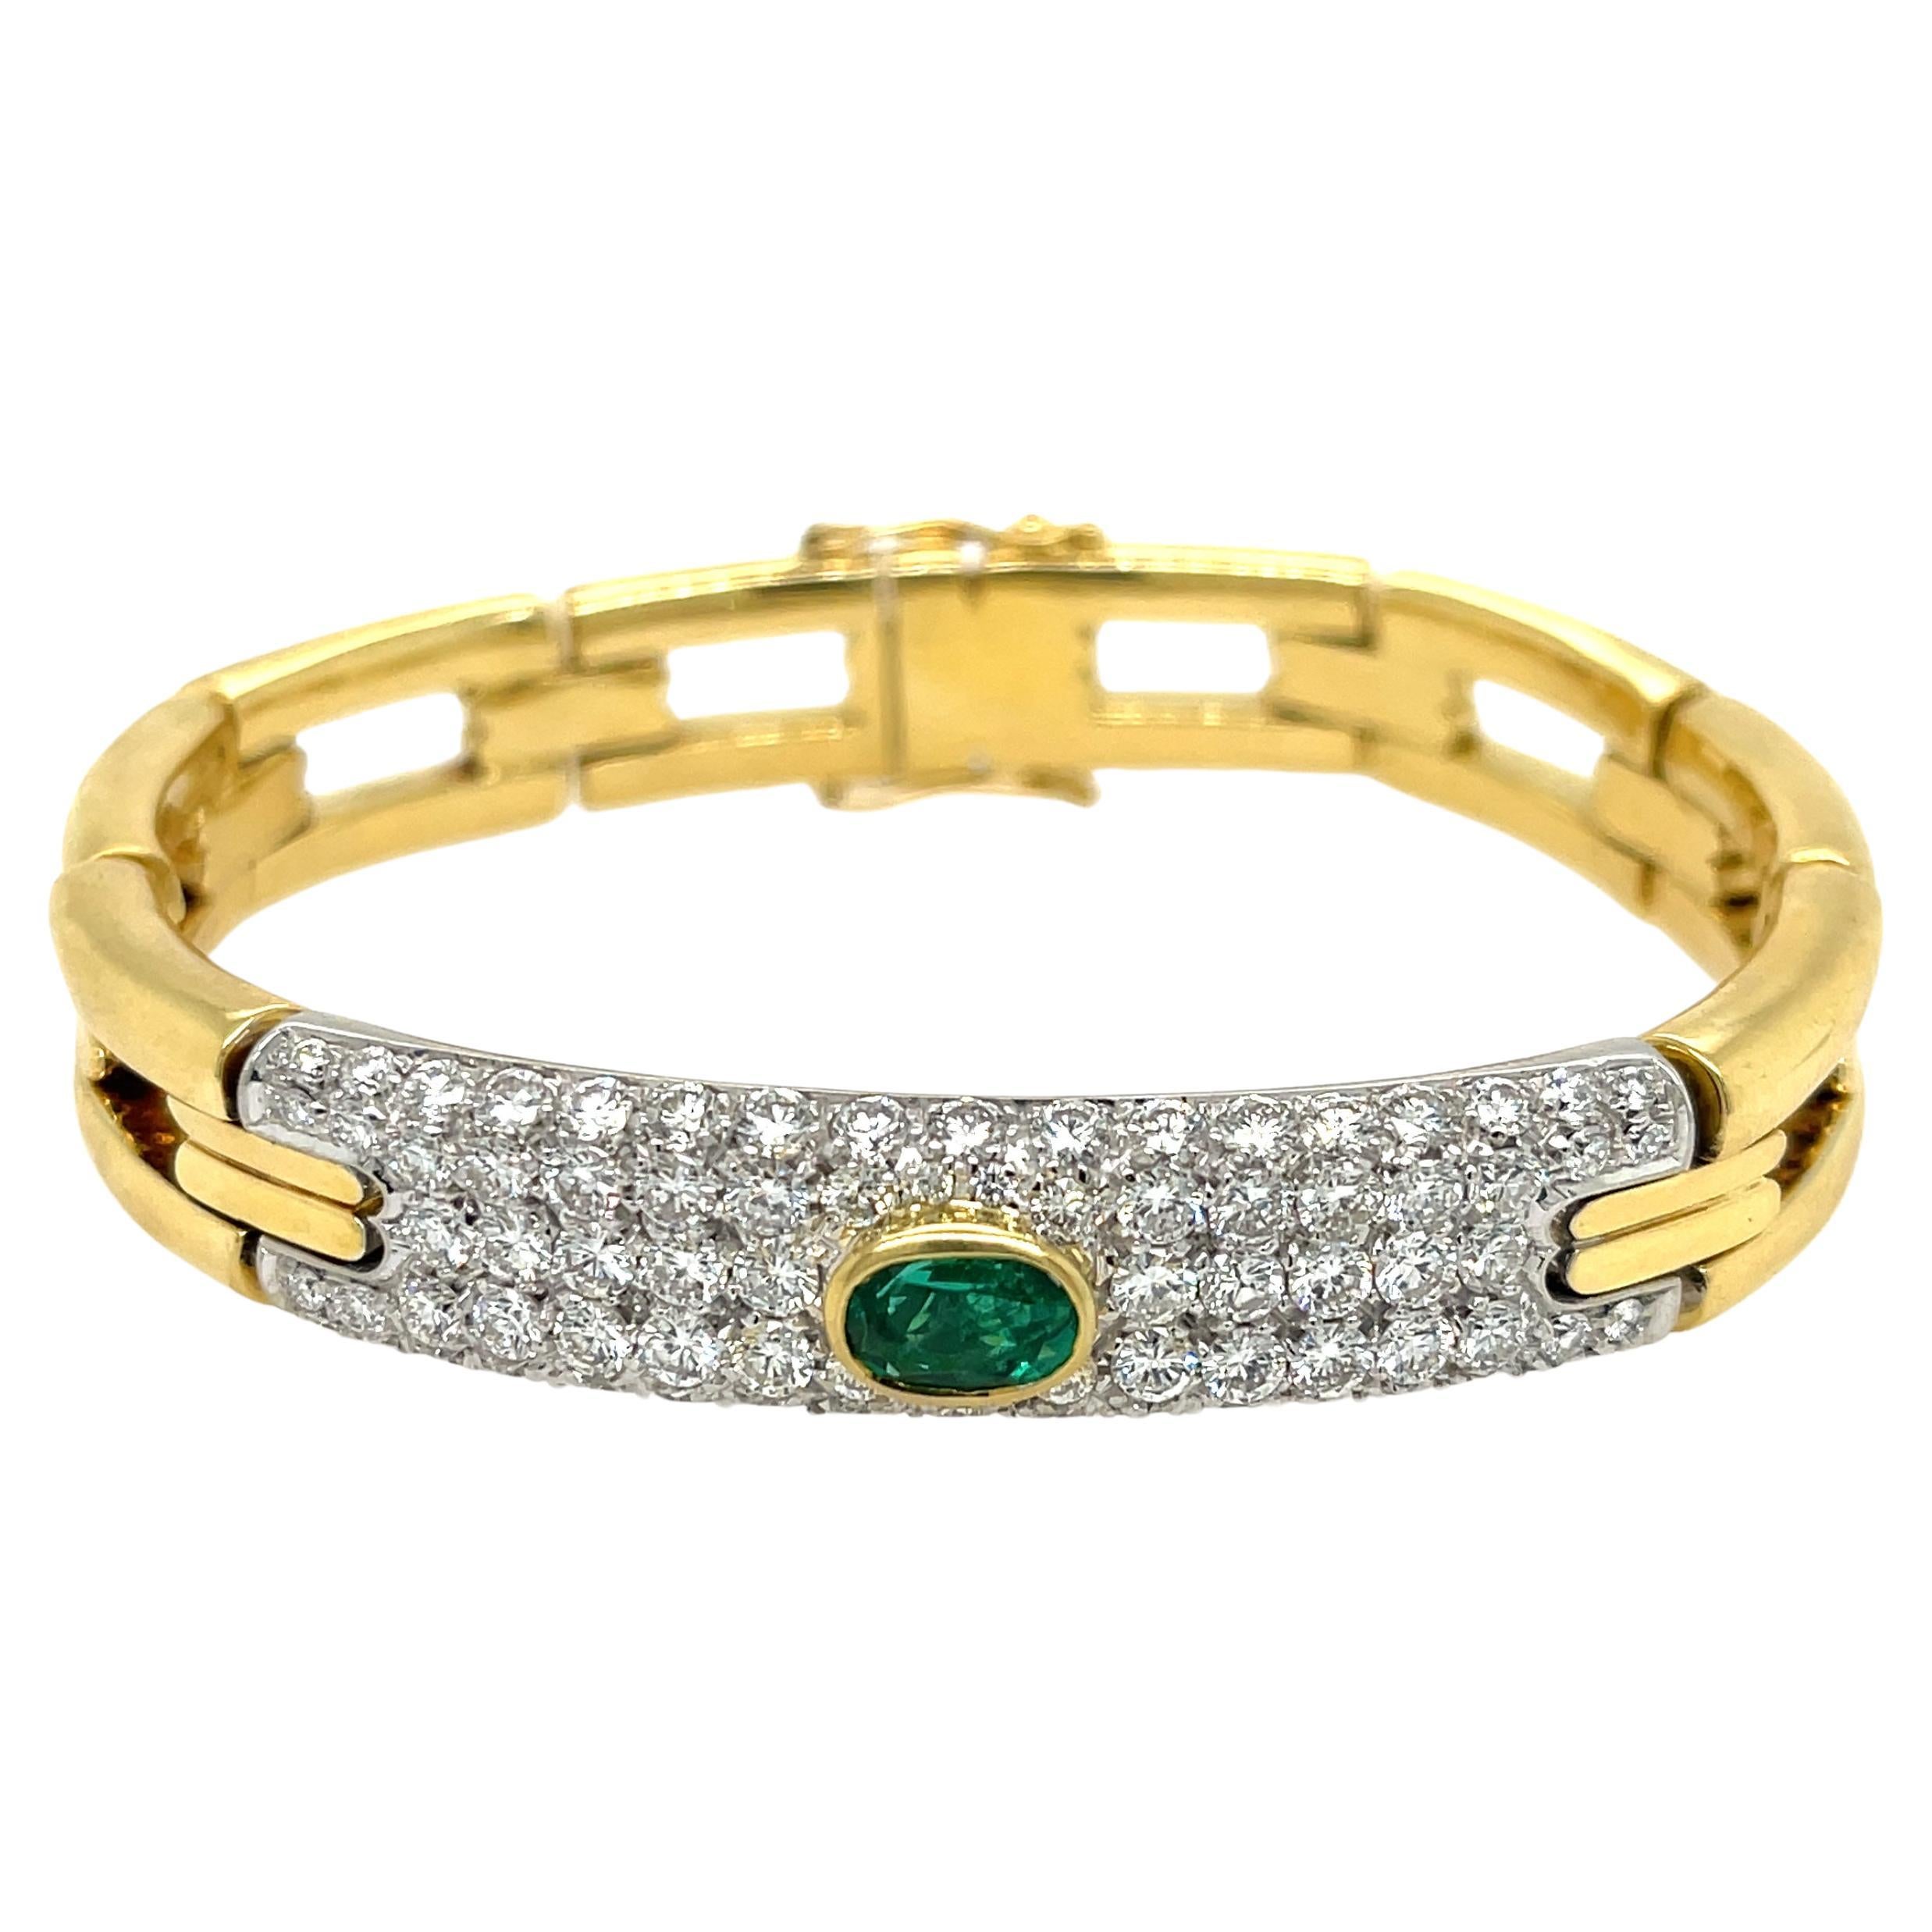 Estate Damiani Emerald and Diamond Bracelet in 18k Yellow Gold For Sale